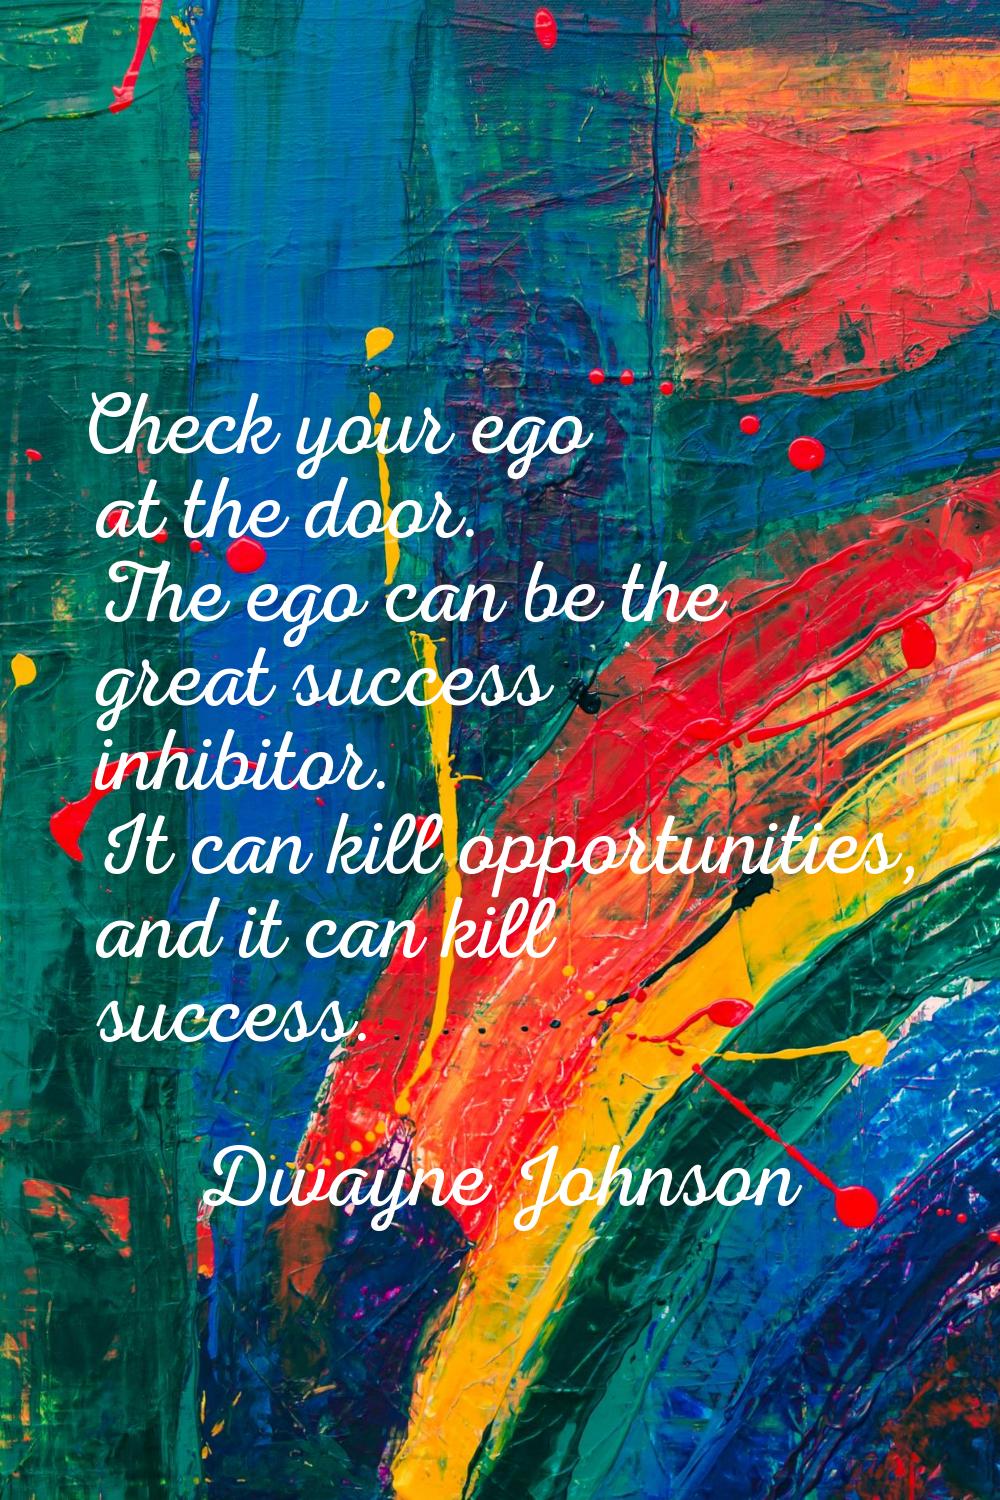 Check your ego at the door. The ego can be the great success inhibitor. It can kill opportunities, 